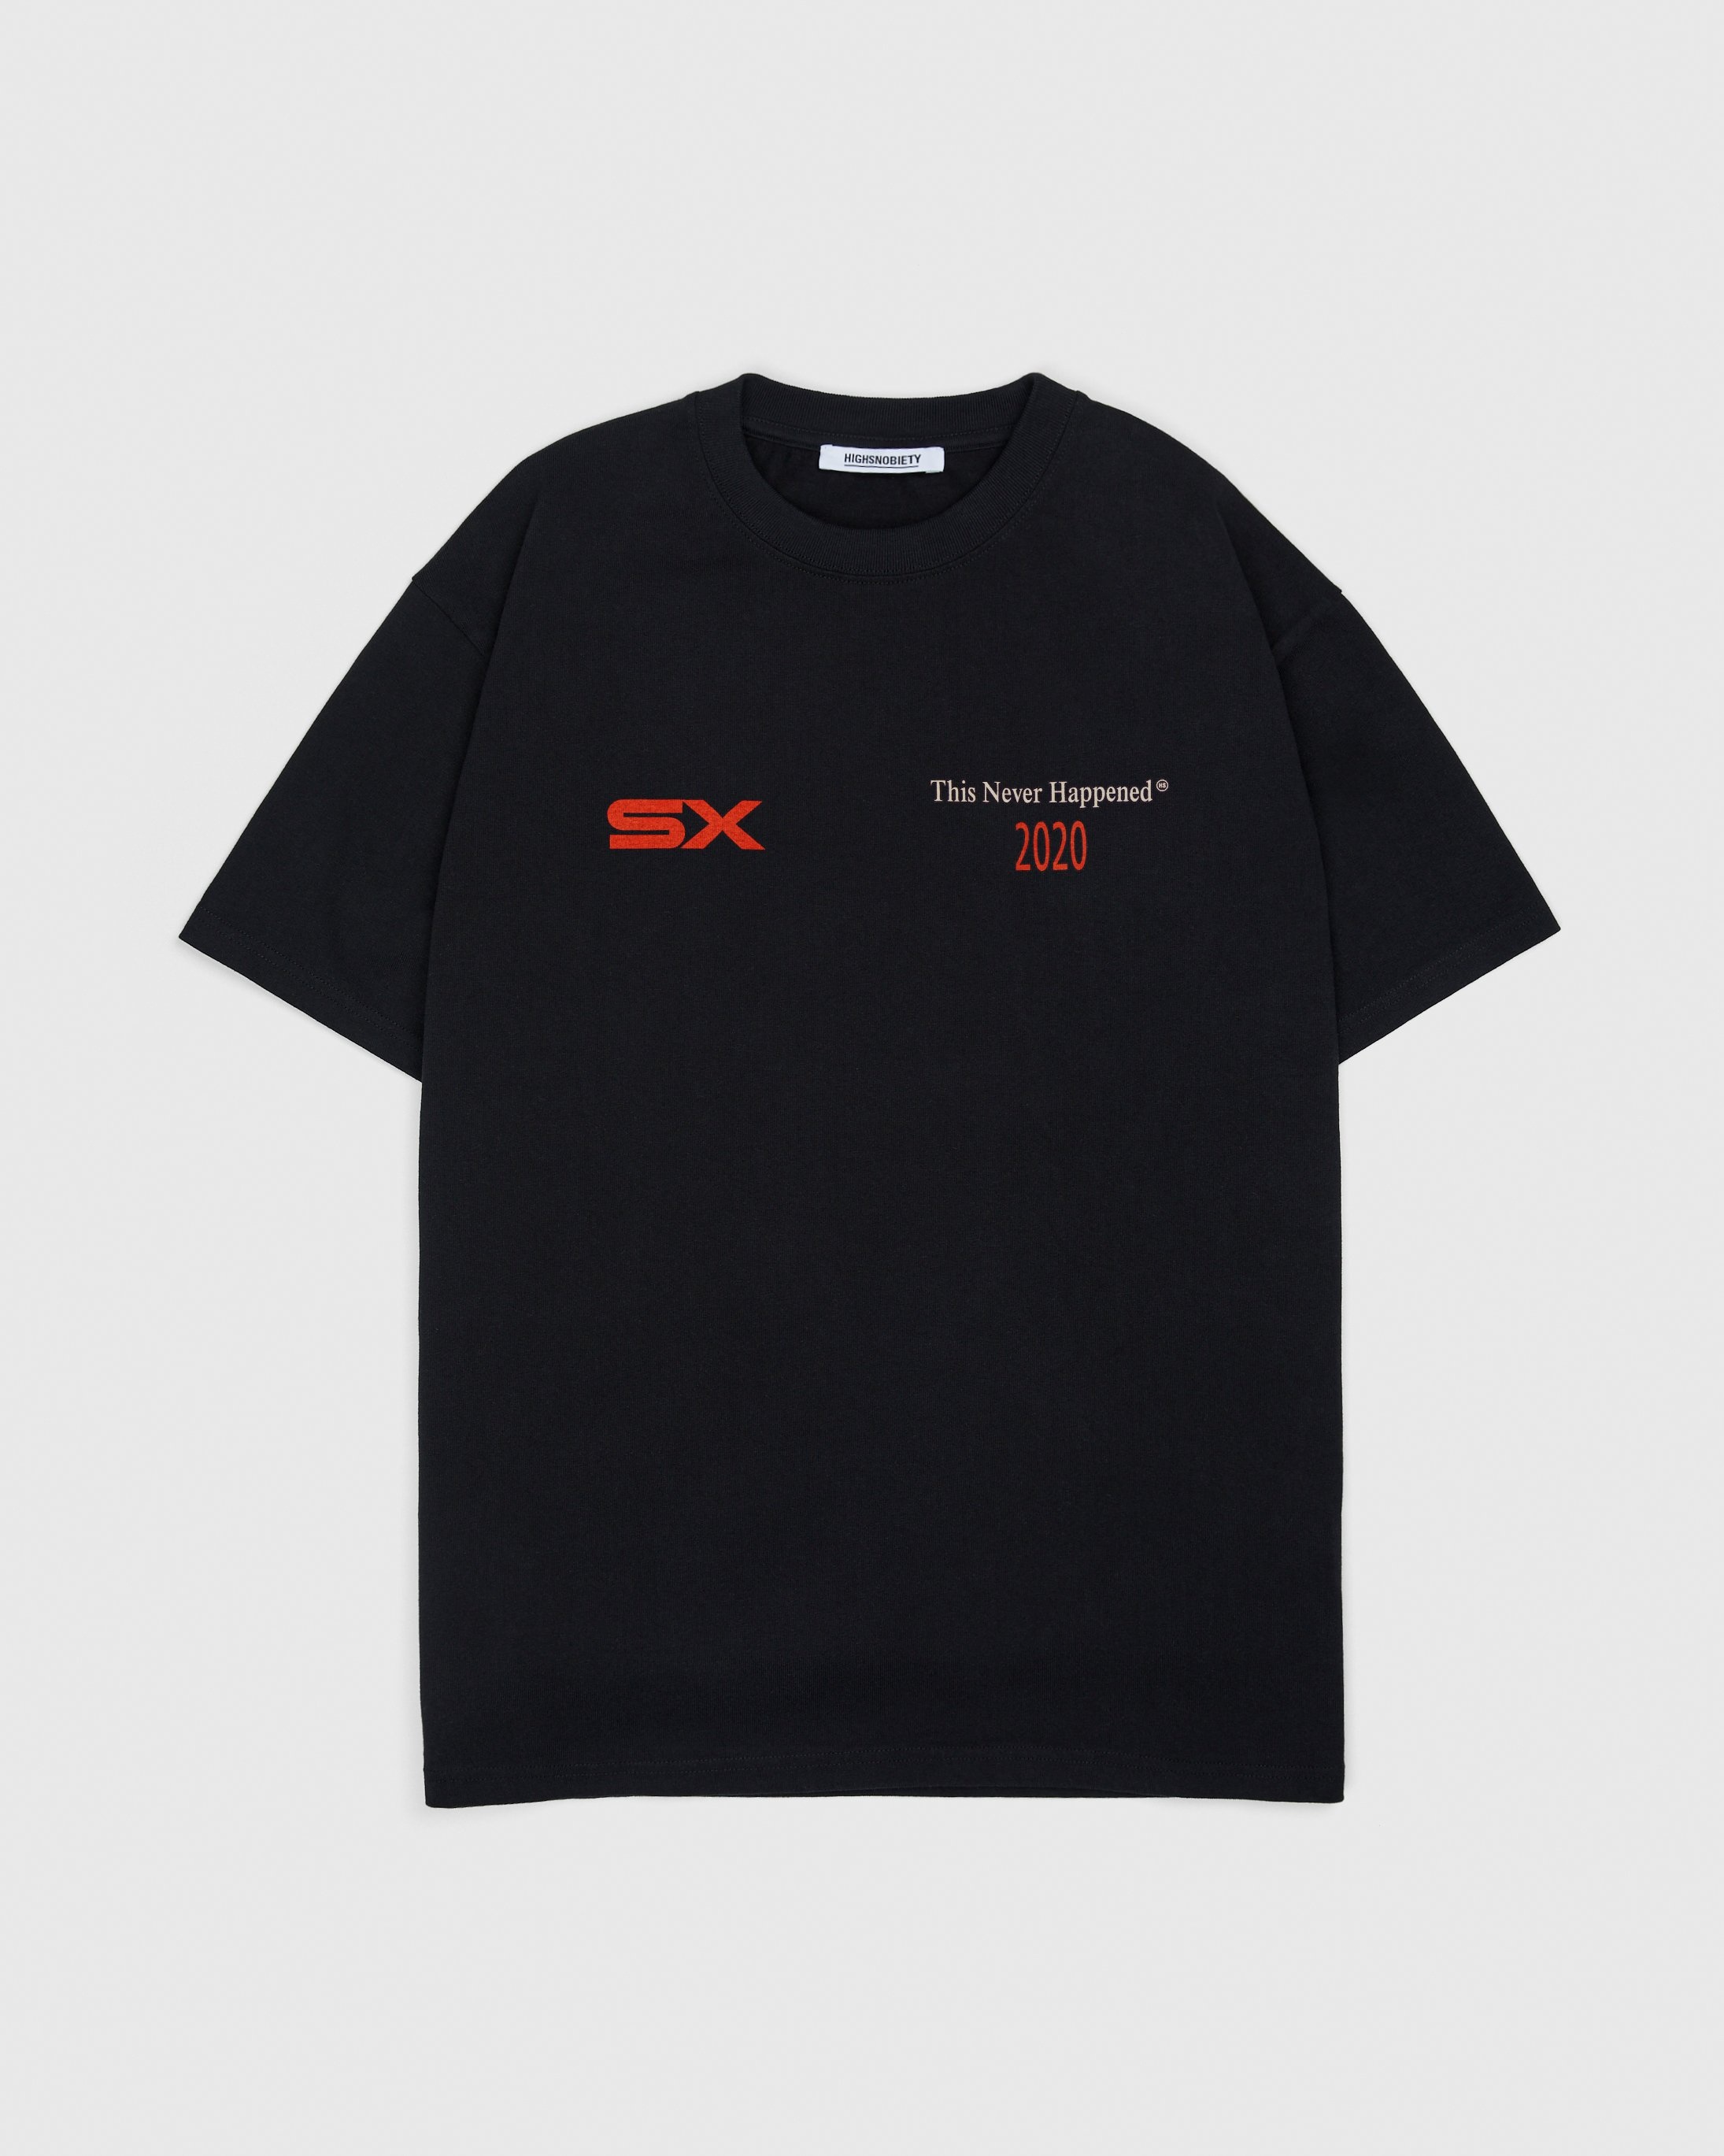 Highsnobiety – This Never Happened Dance Clubs T-Shirt Black - Tops - Black - Image 2